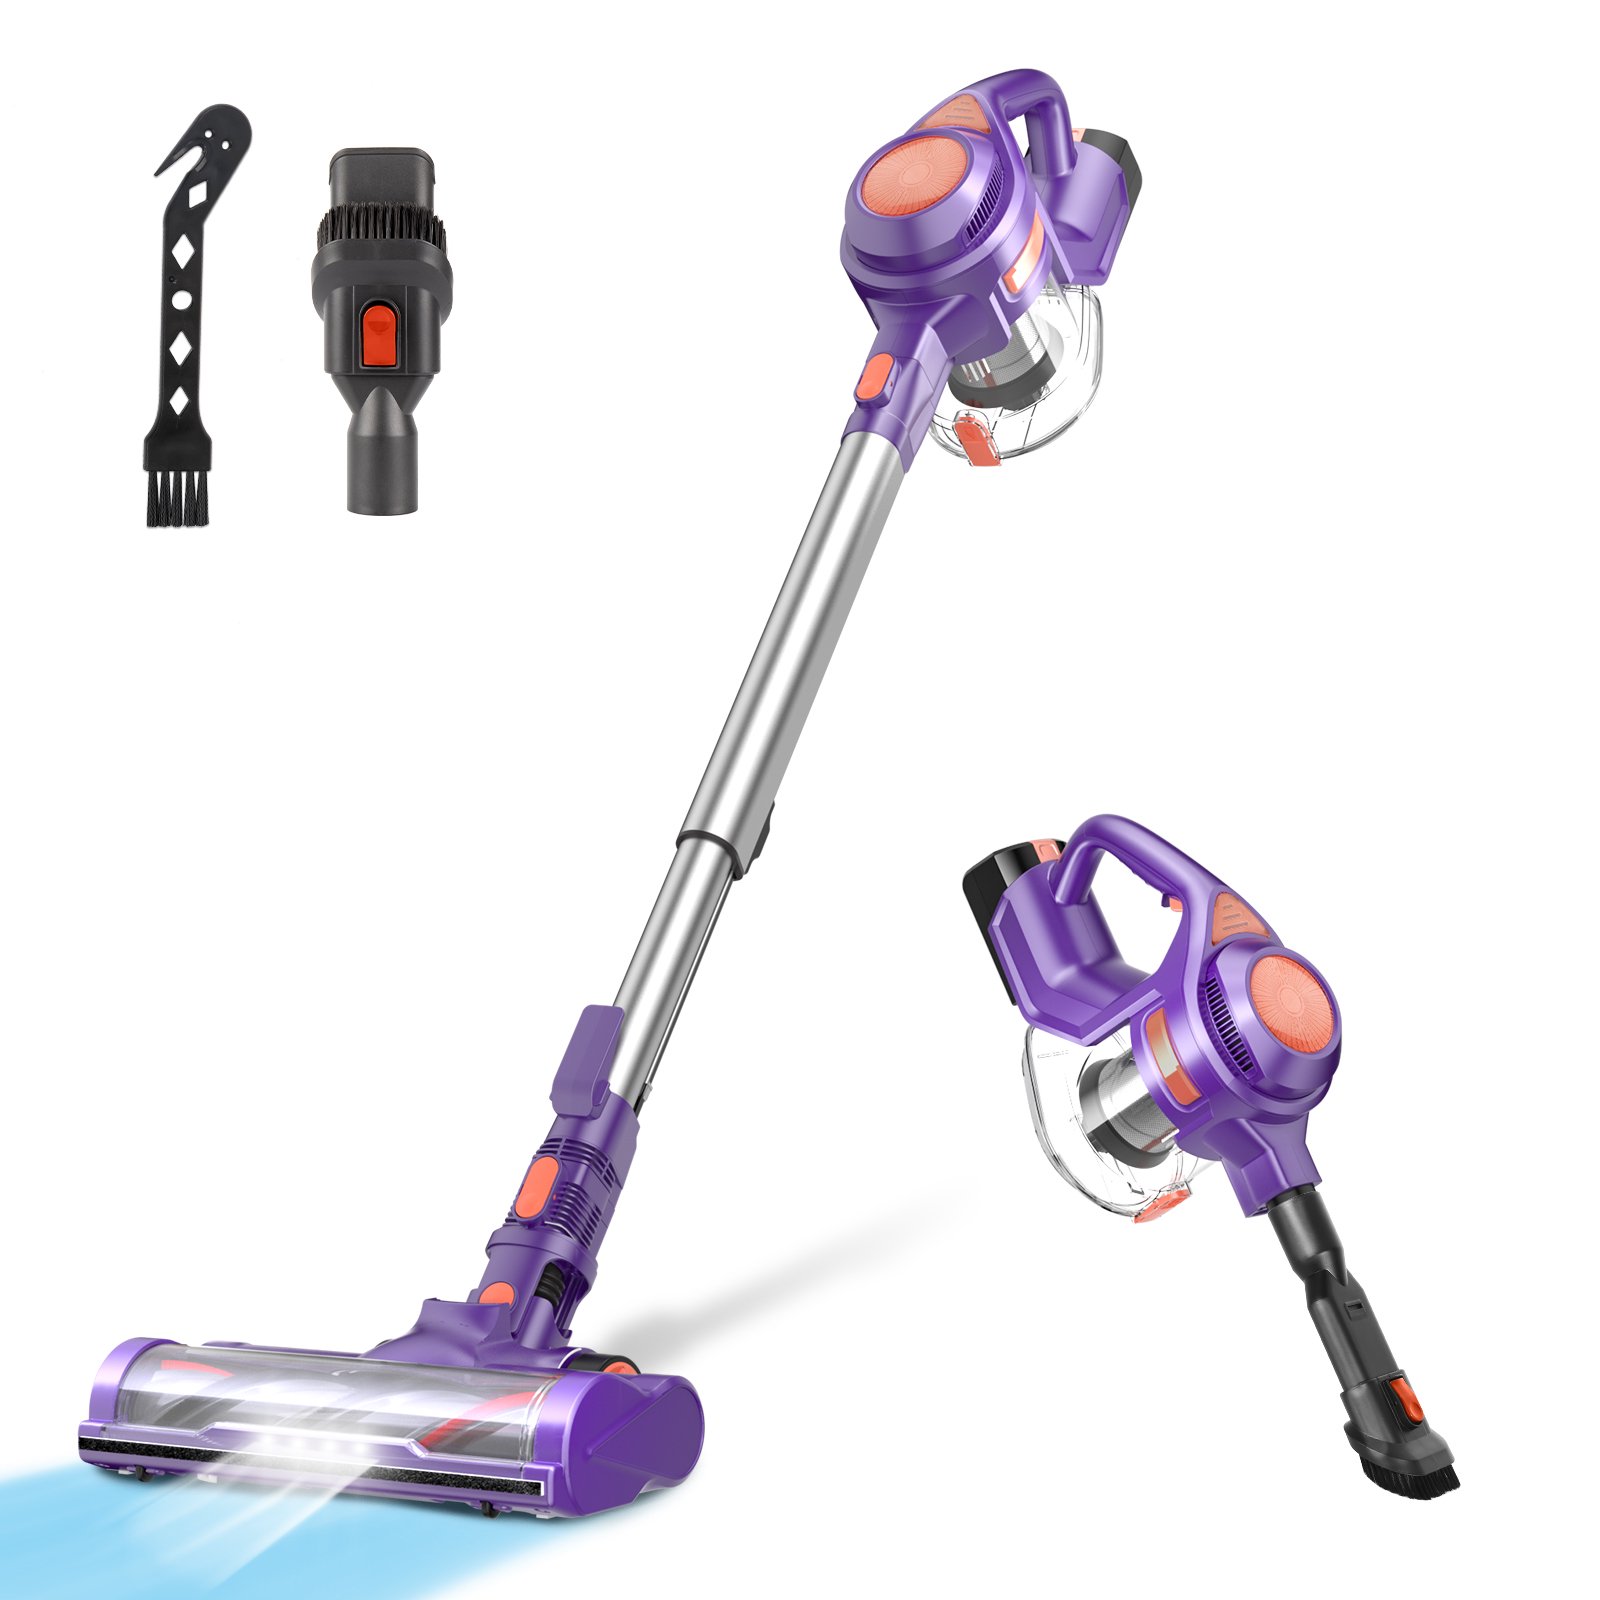 MOOSOO Cordless Vacuum Strong Suction Quiet Lightweight 4 in 1 Stick Vacuum Cleaner - image 1 of 8